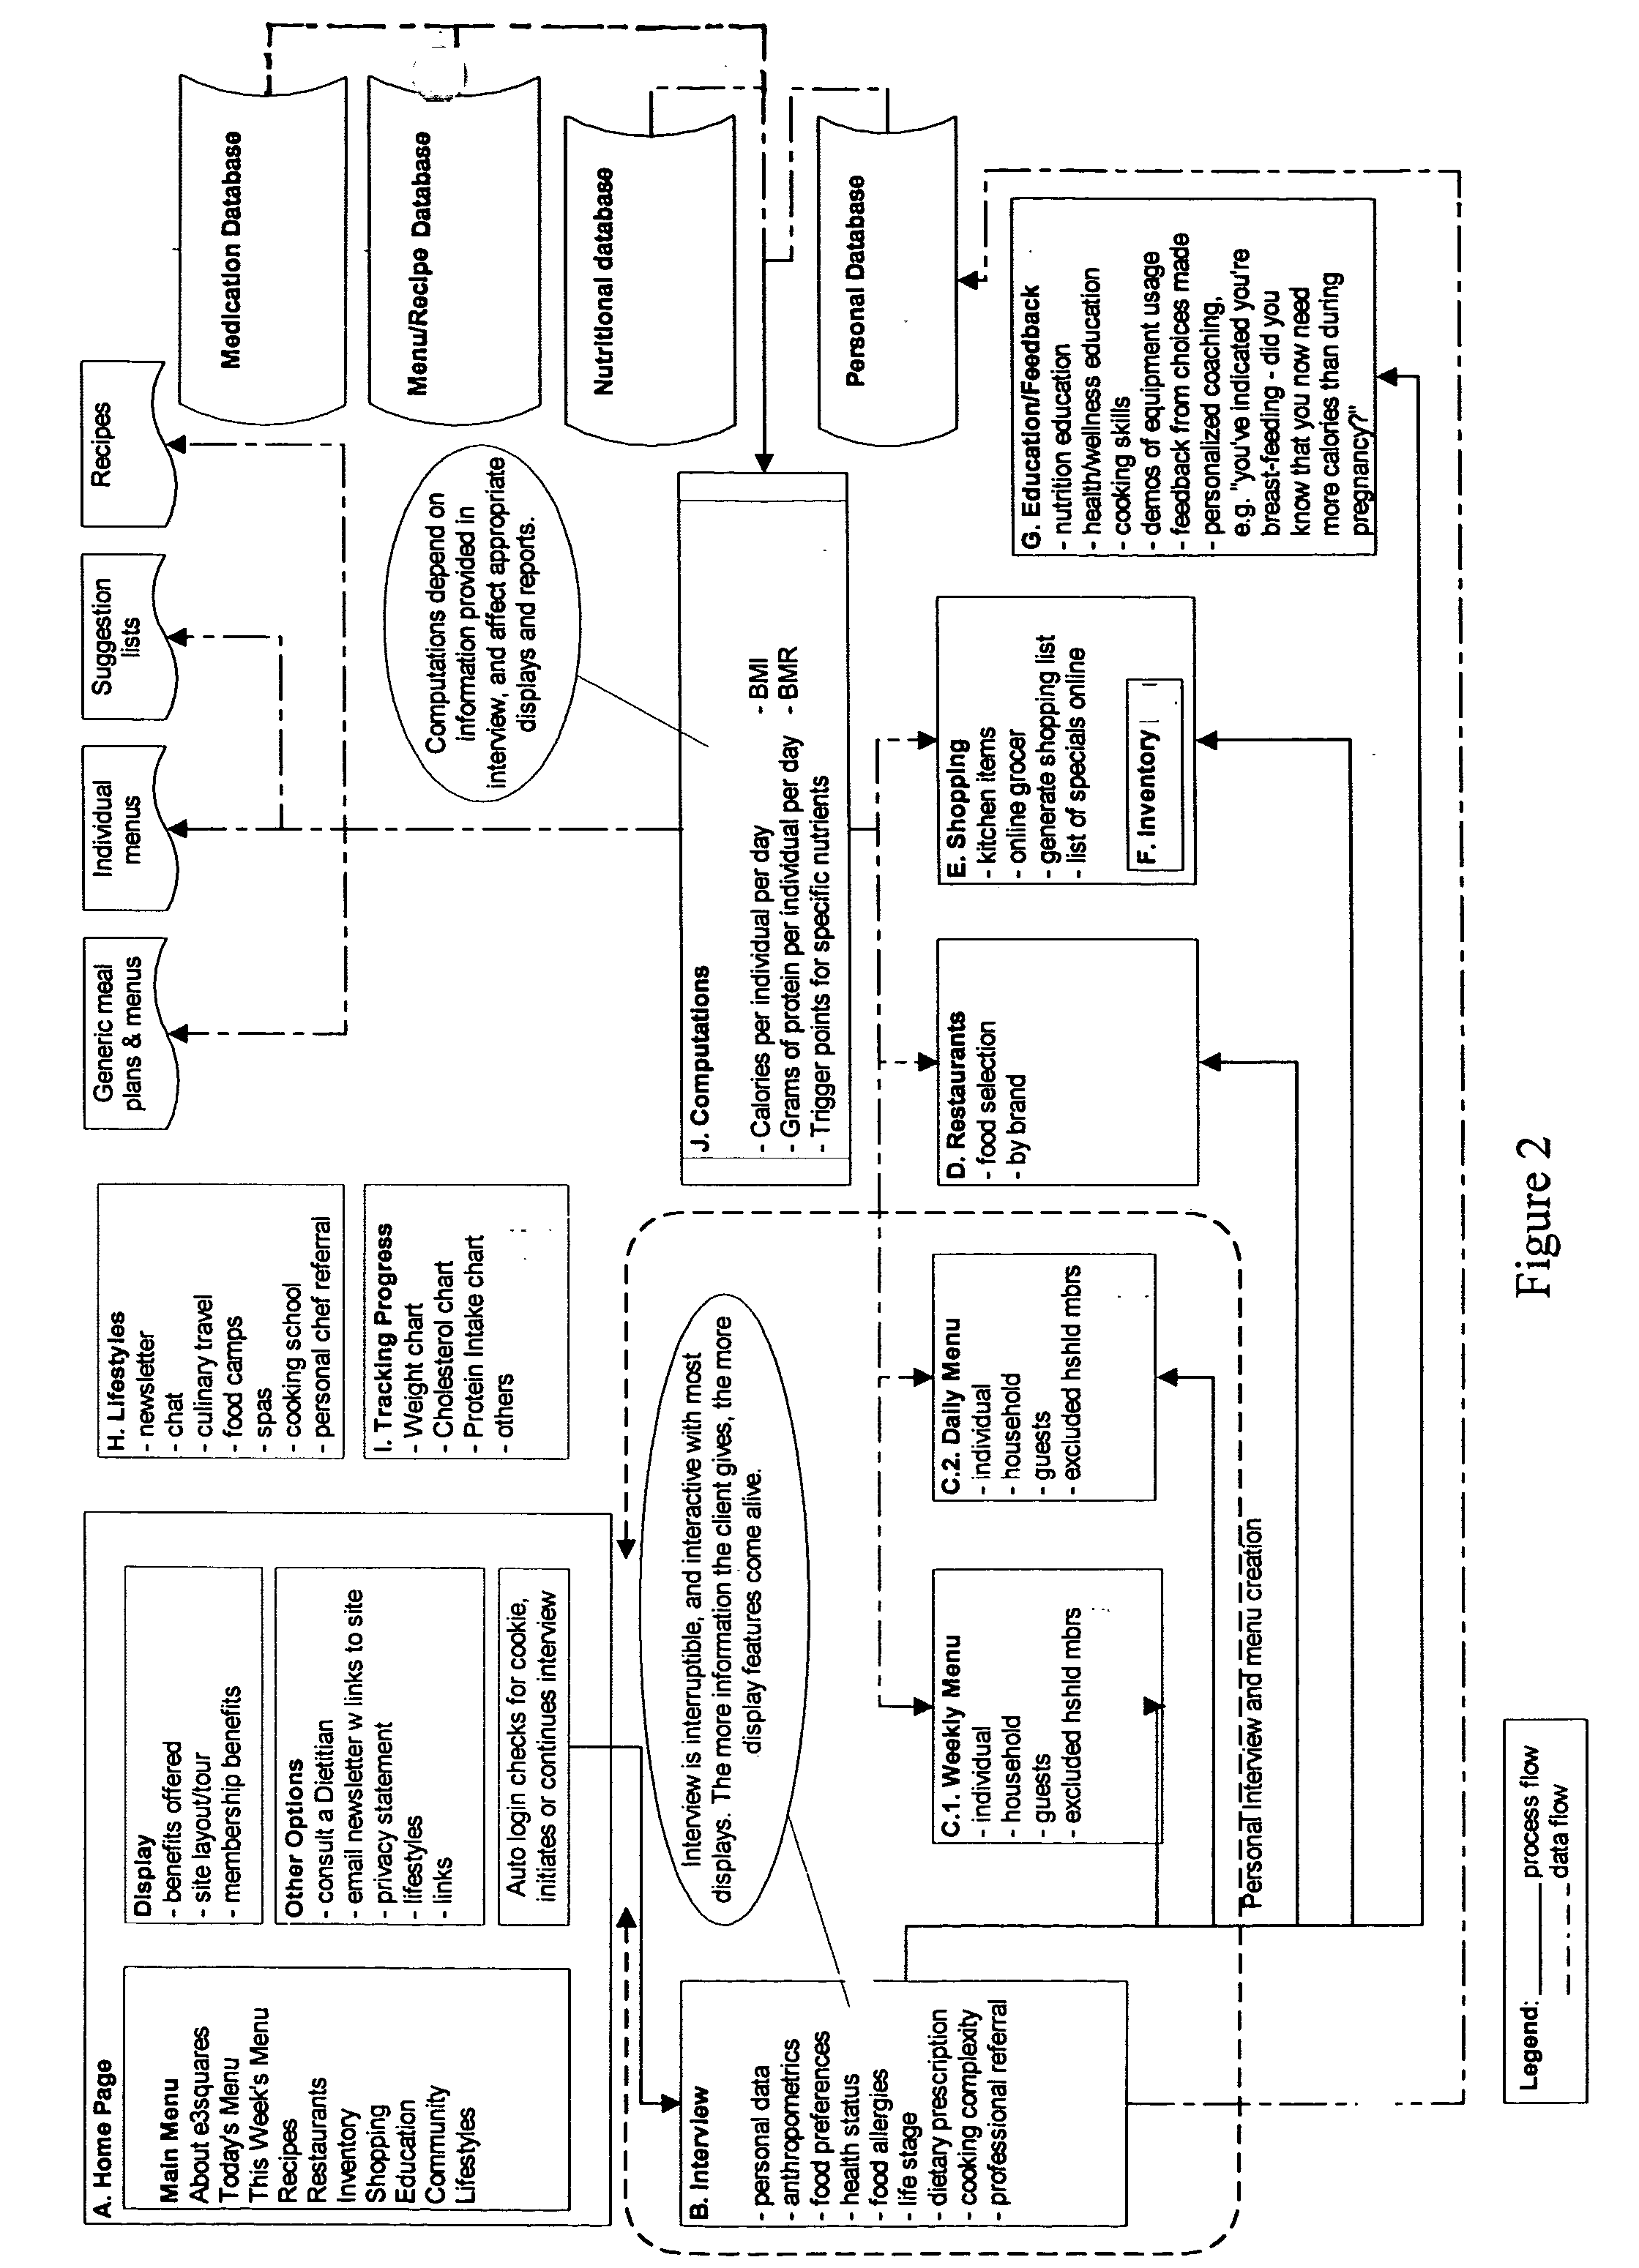 Method and system for providing dietary information